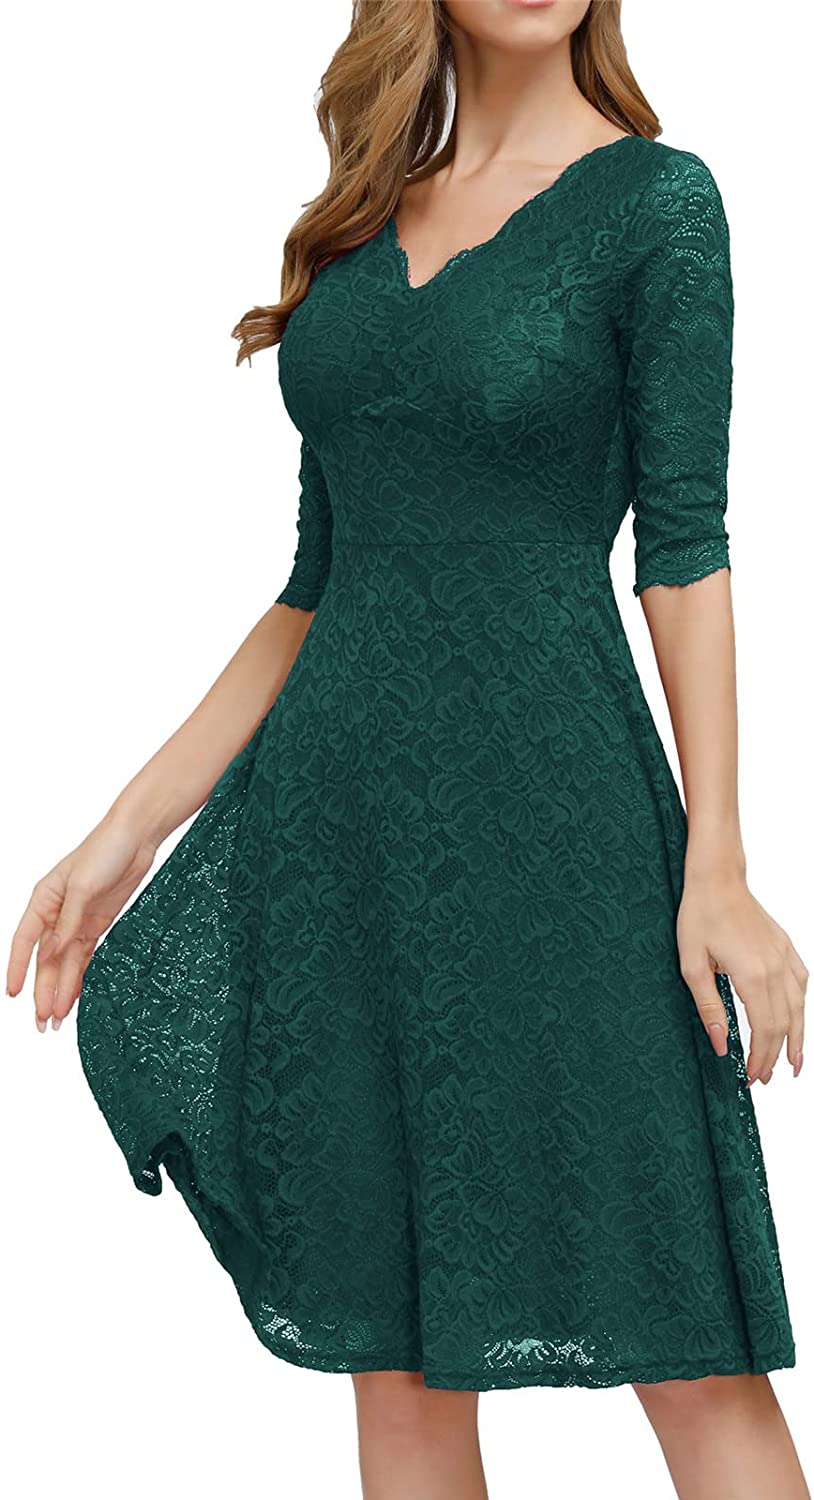 JASAMBAC Cocktail Dress for Women Vintage Wedding Guest Lace Midi